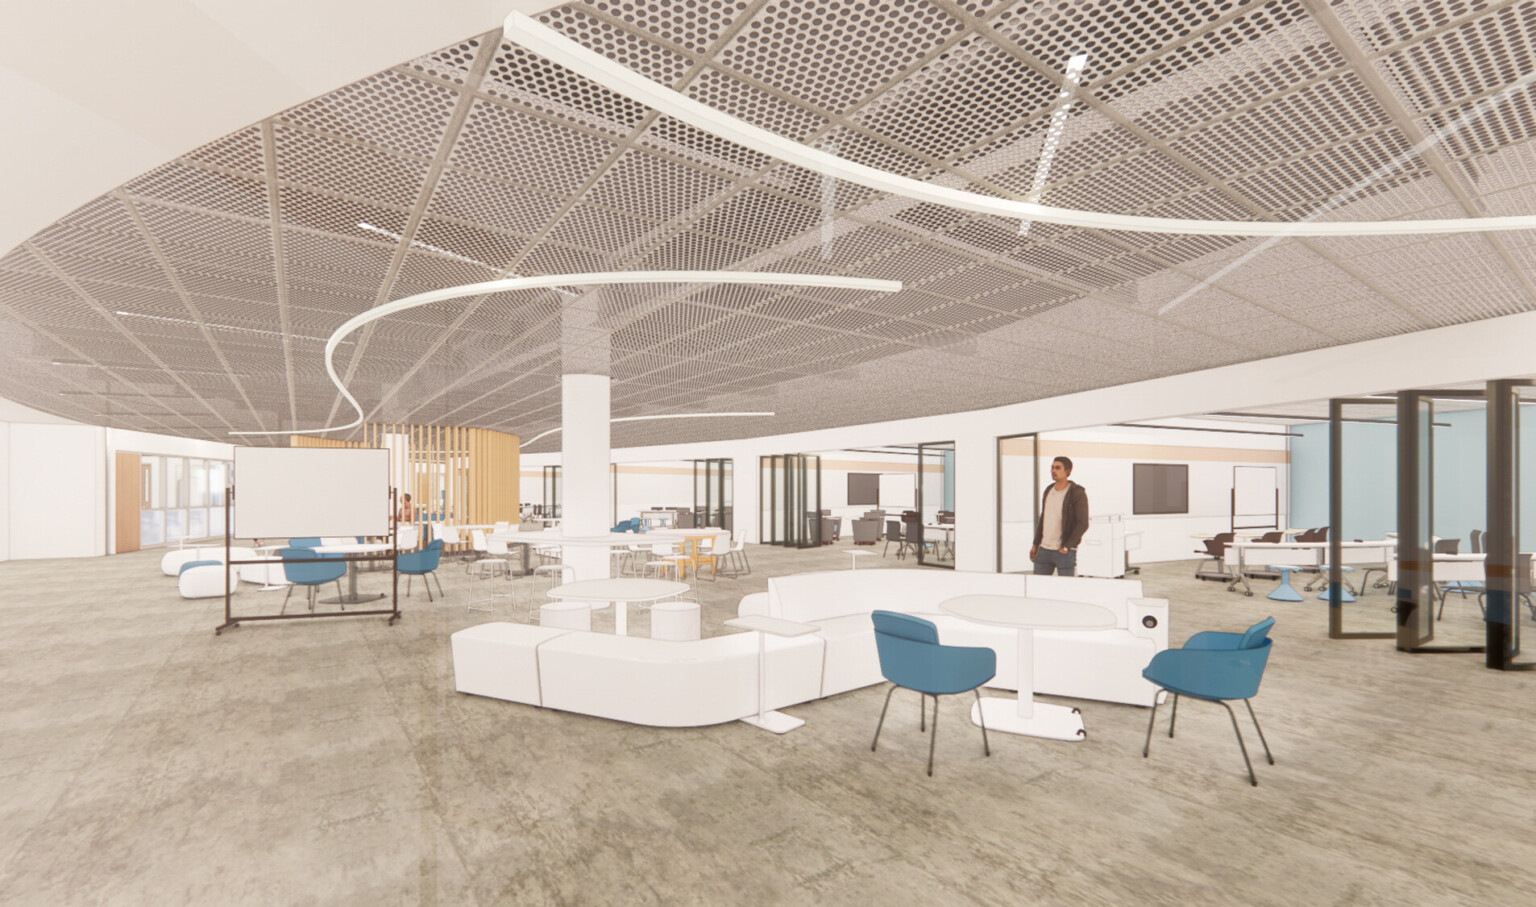 Rendering of interior of school common space with mixed flexible seating and walls, movable white board. Textured perforated ceiling